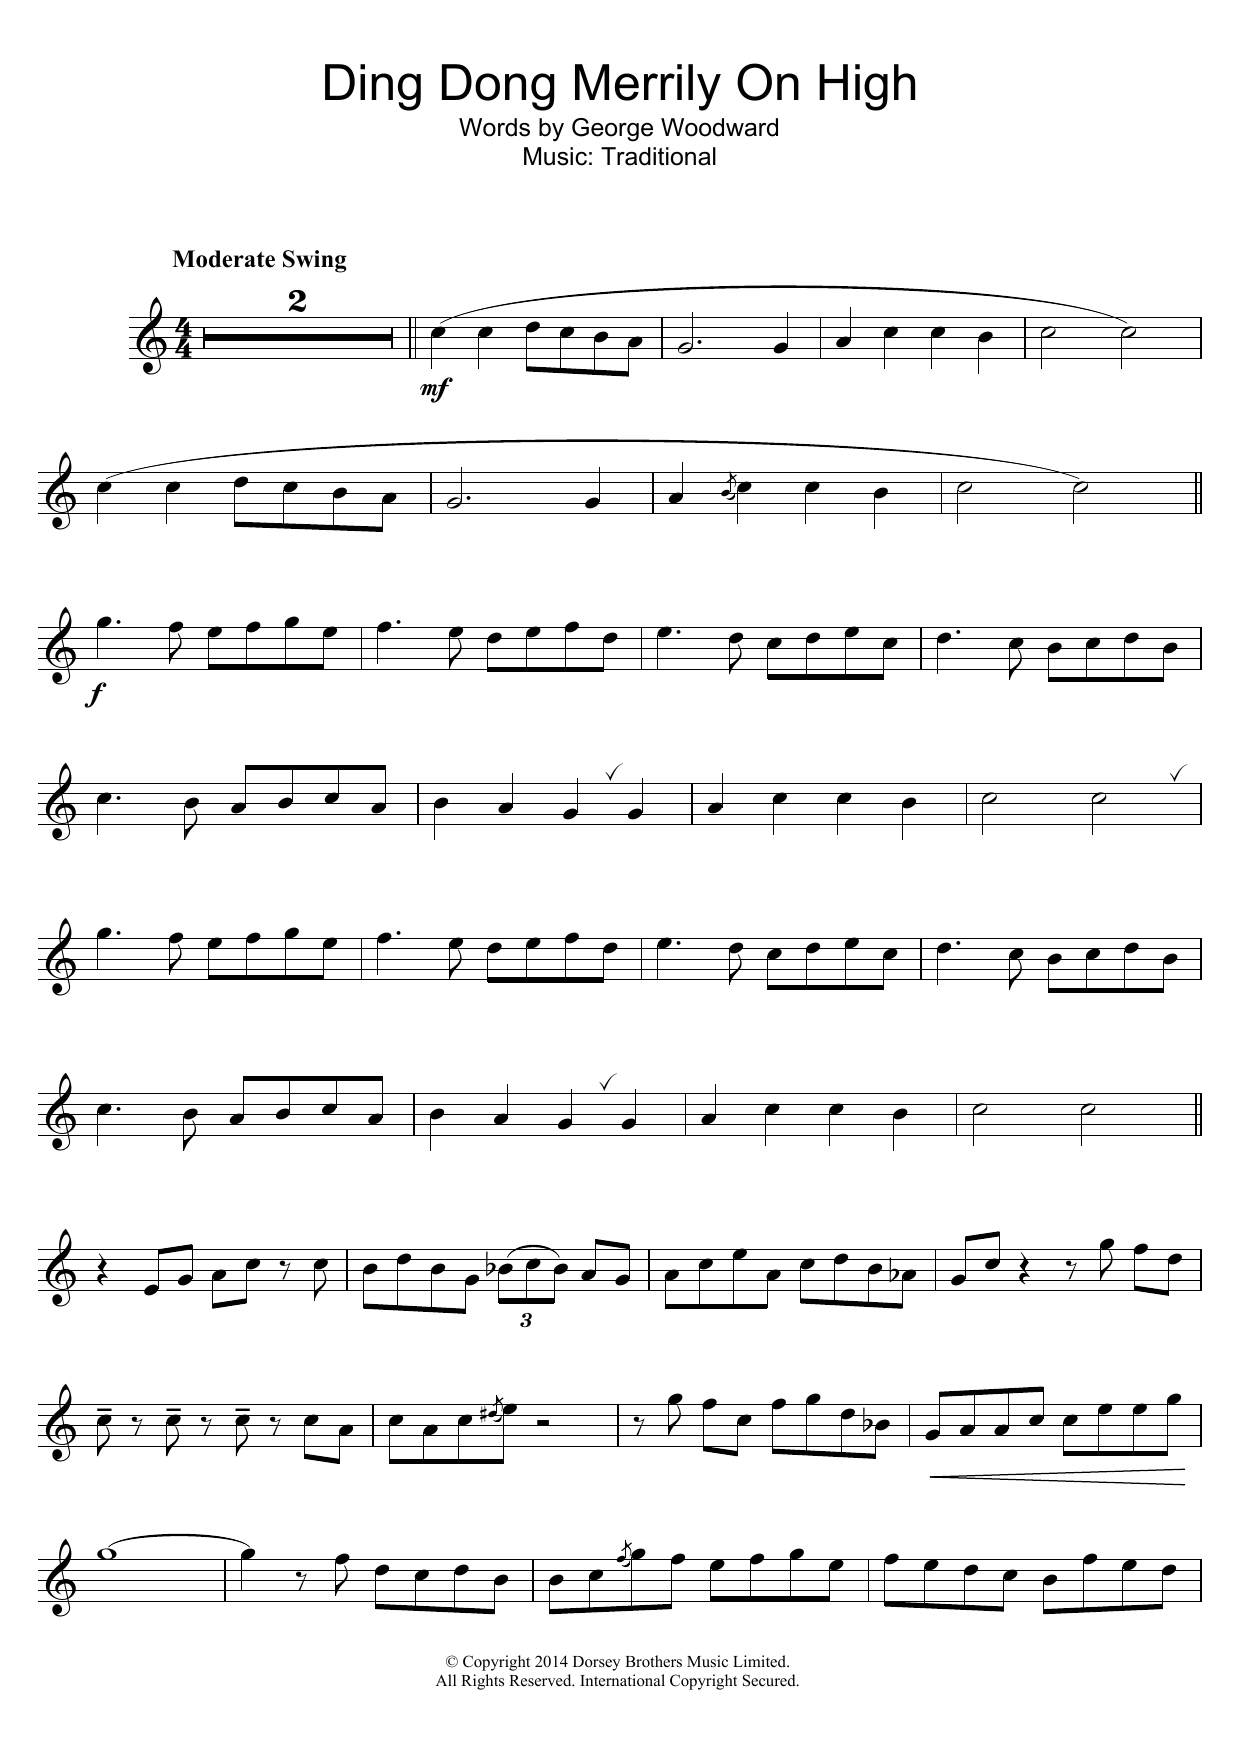 Christmas Carol Ding Dong! Merrily On High sheet music notes and chords. Download Printable PDF.